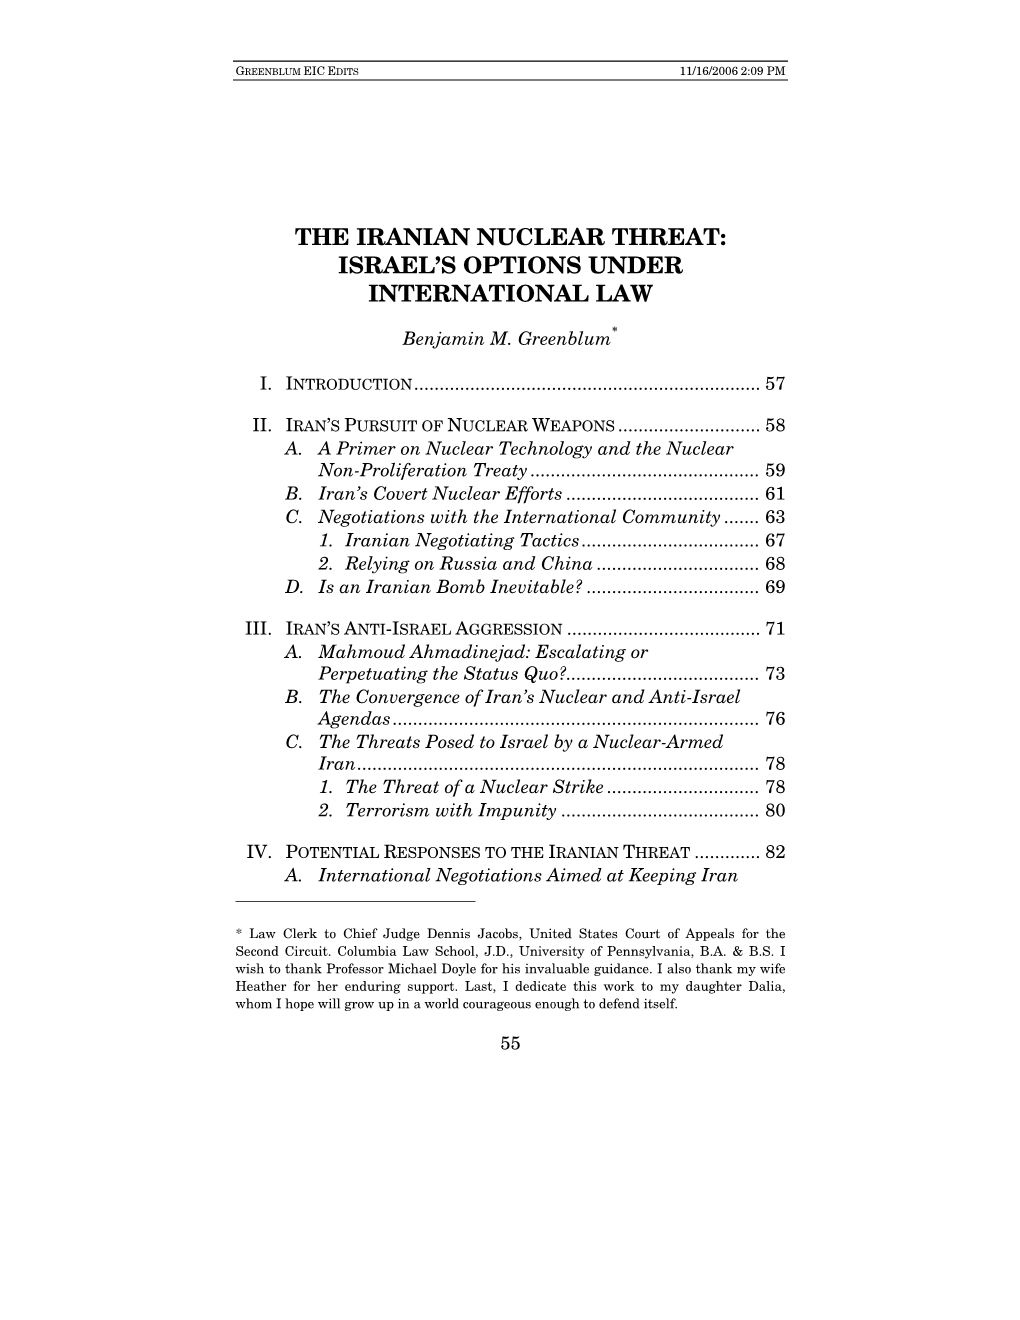 The Iranian Nuclear Threat: Israel's Options Under International